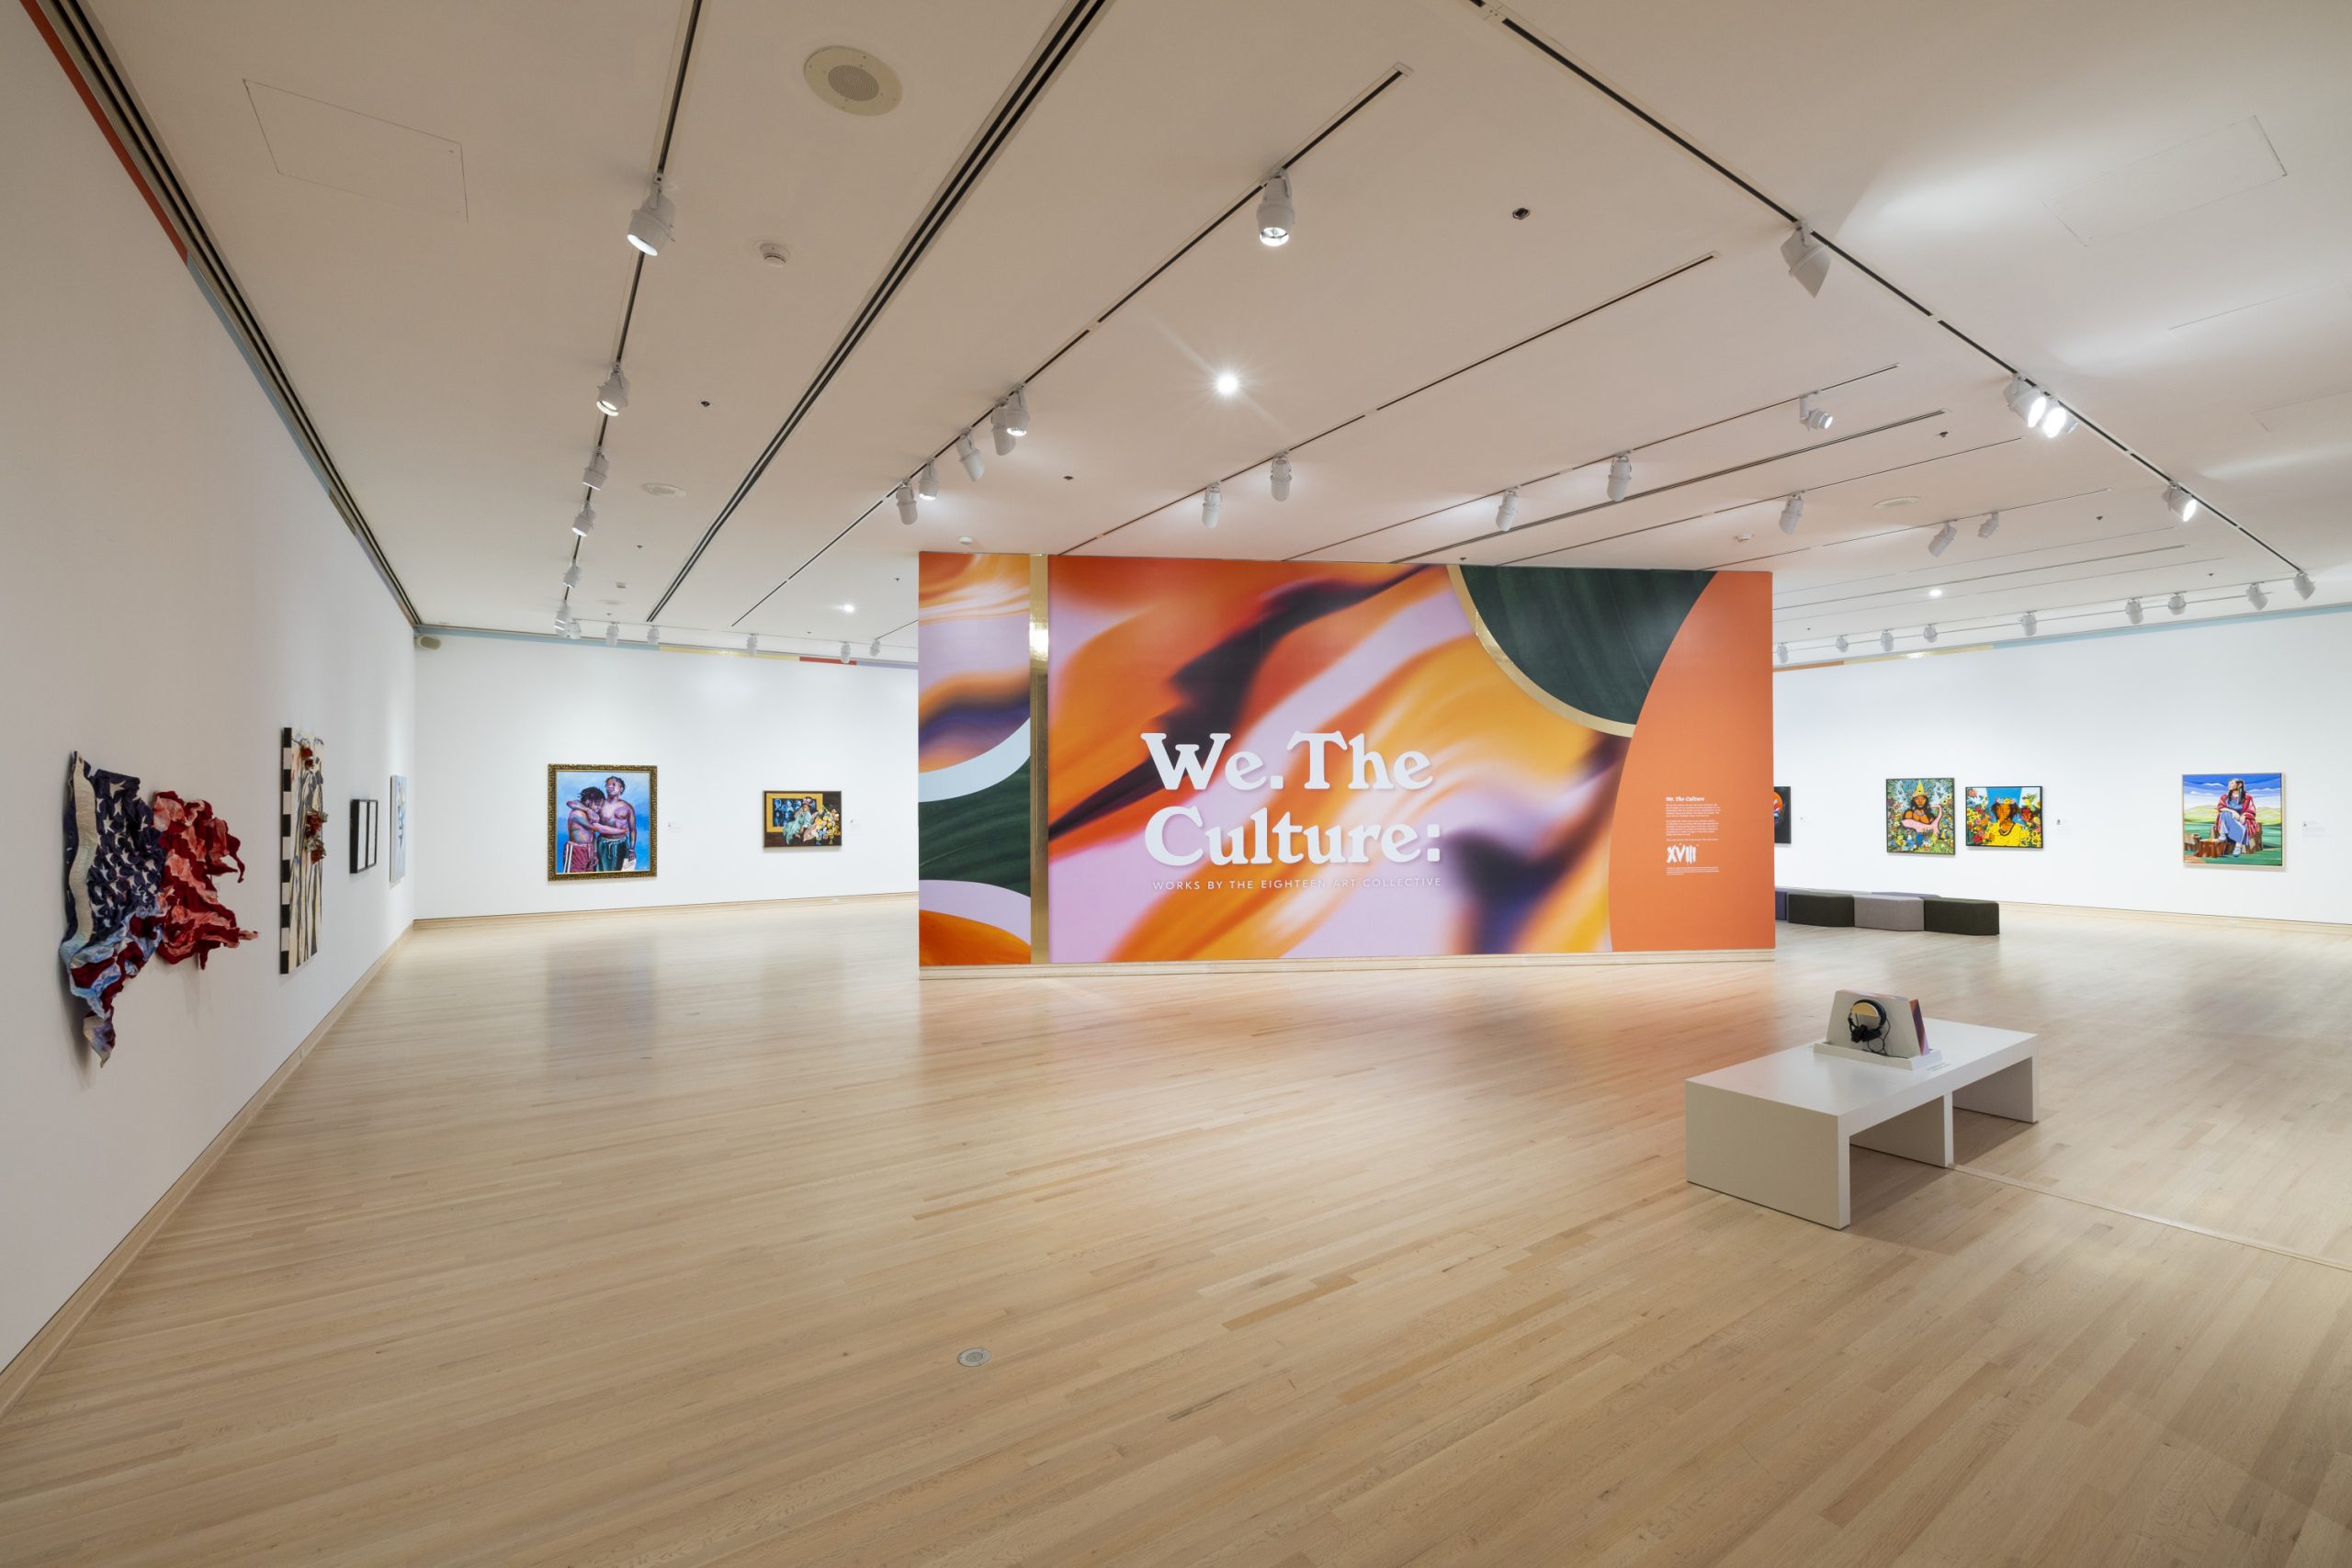 Image: Installation view of We. The Culture: Works by The Eighteen Art Collective in the June M. McCormack Forefront Galleries, September 23, 2022–September 24, 2023. Floating wall with the show's title surrounded by paintings on white walls in a square-shaped room. Photo courtesy of the Indianapolis Museum of Art at Newfields.